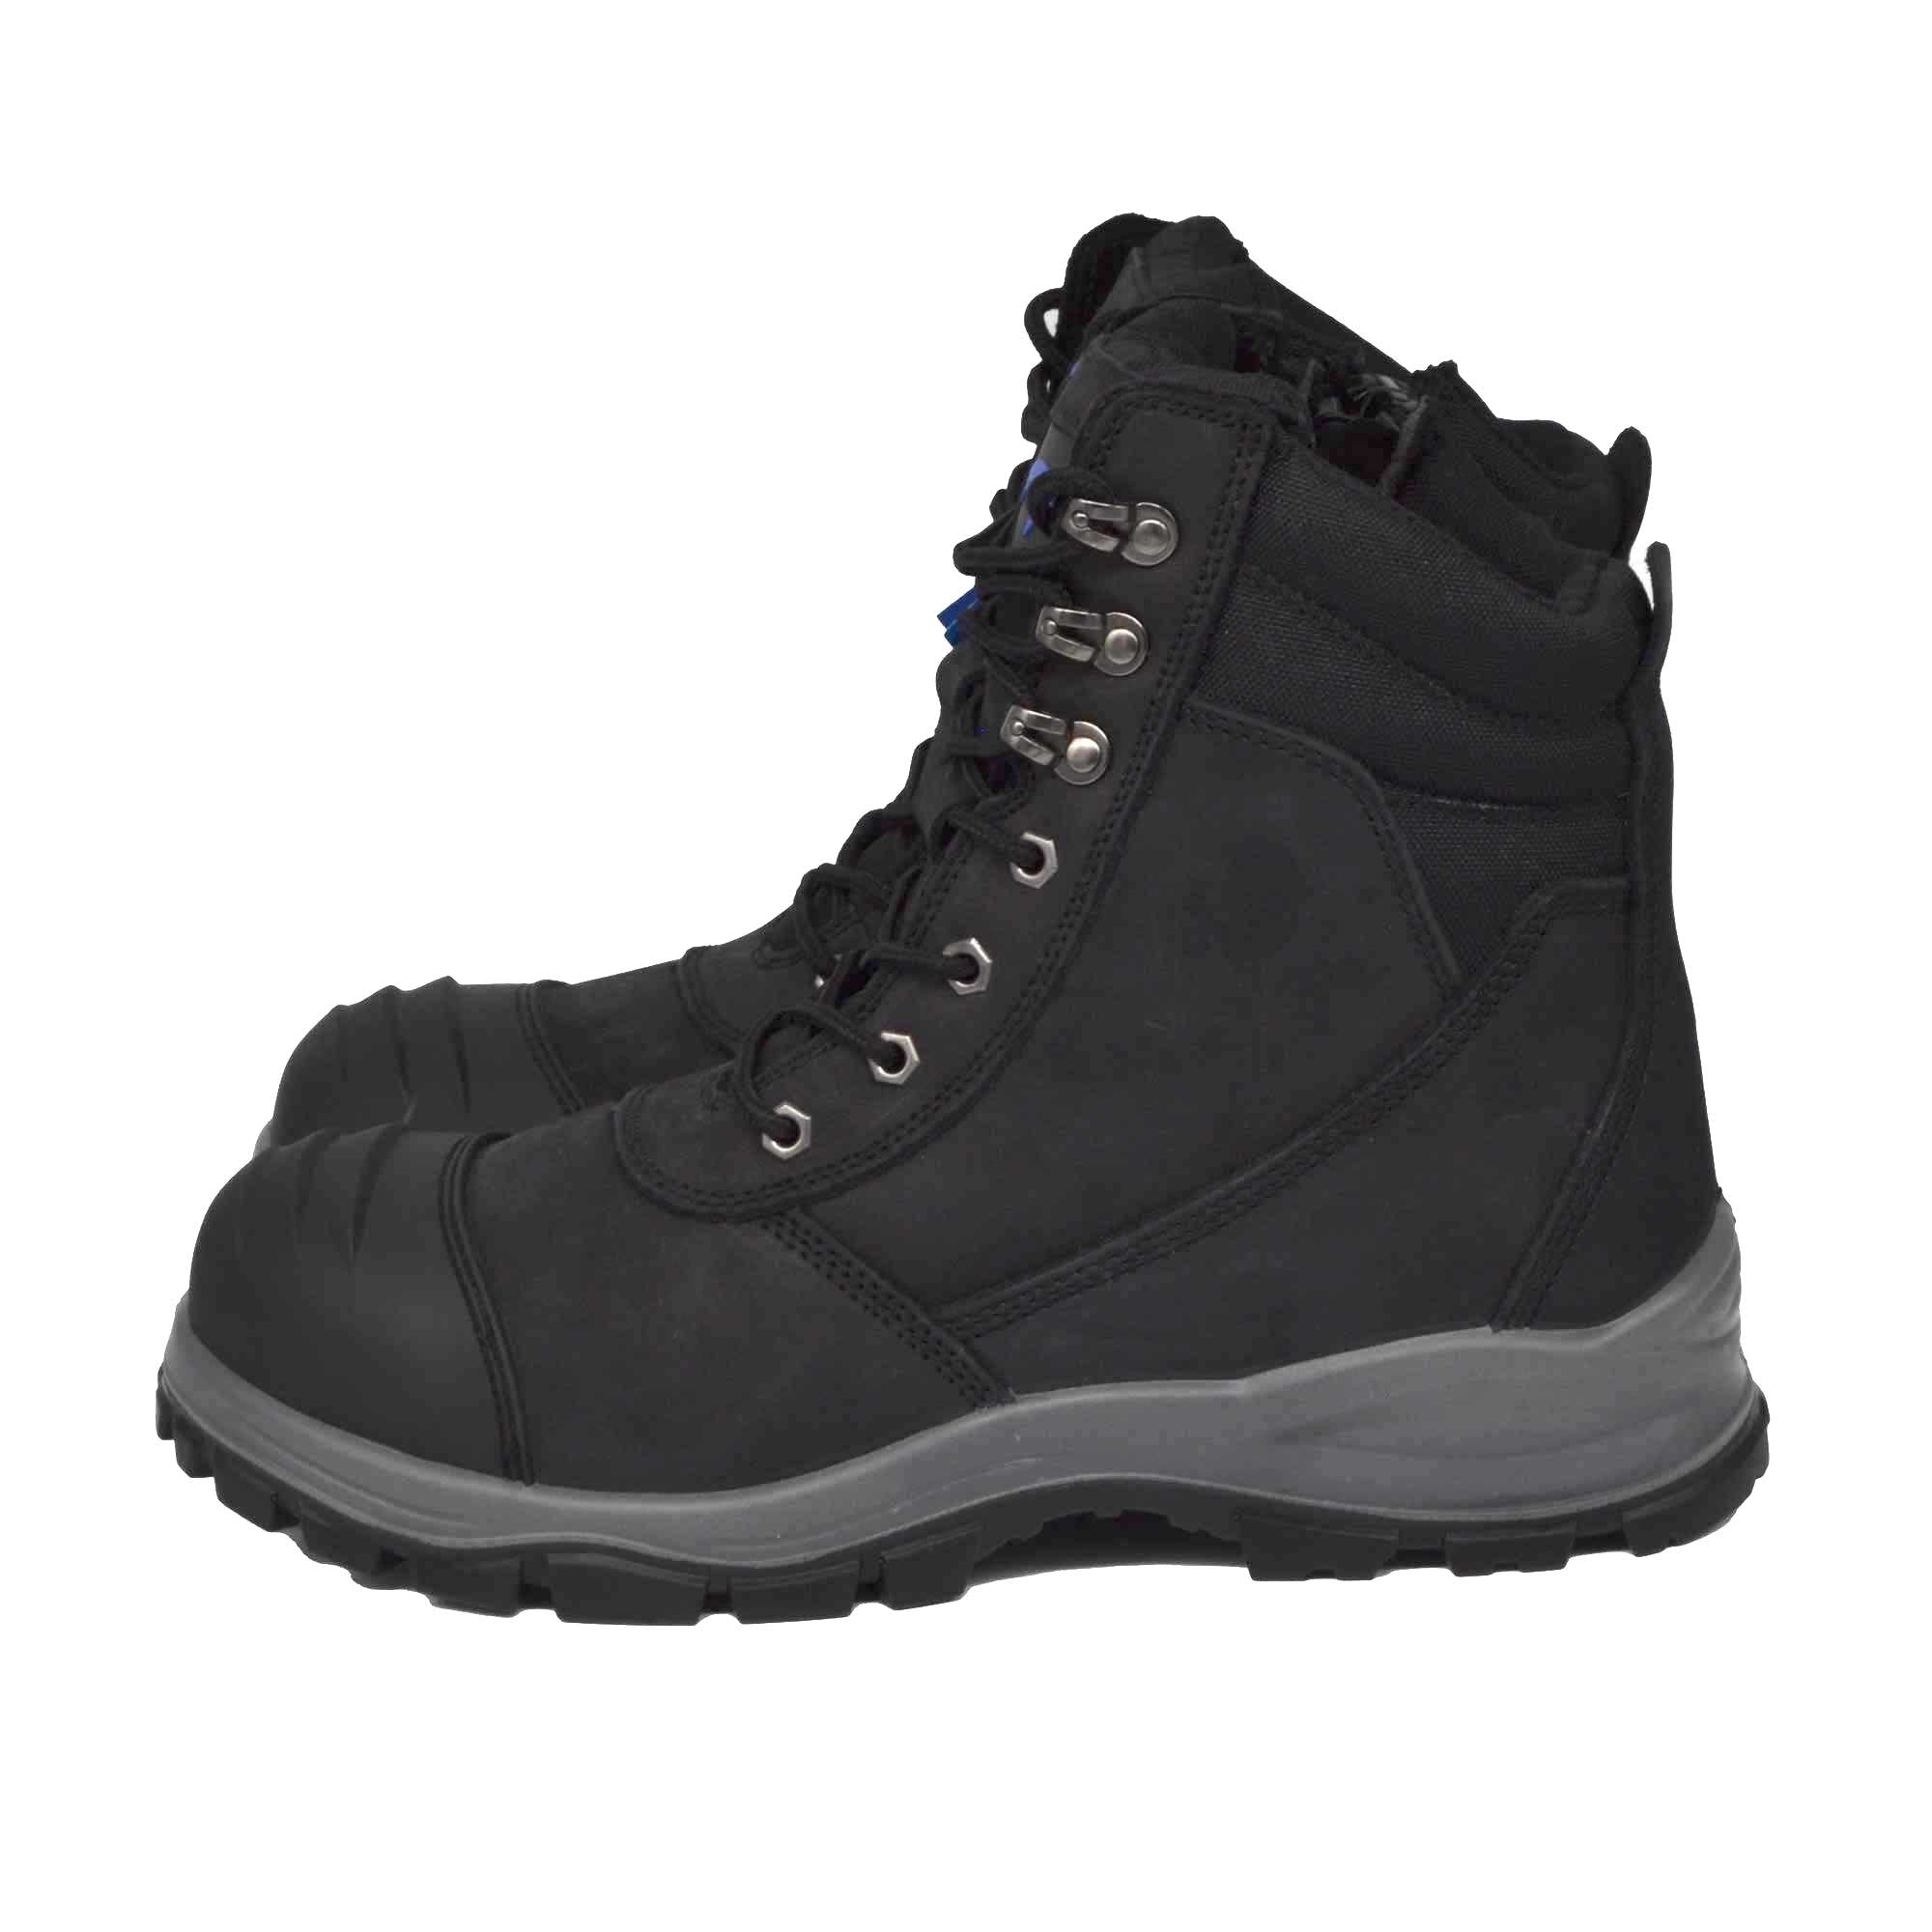  Side Zip Safety Boots NZ